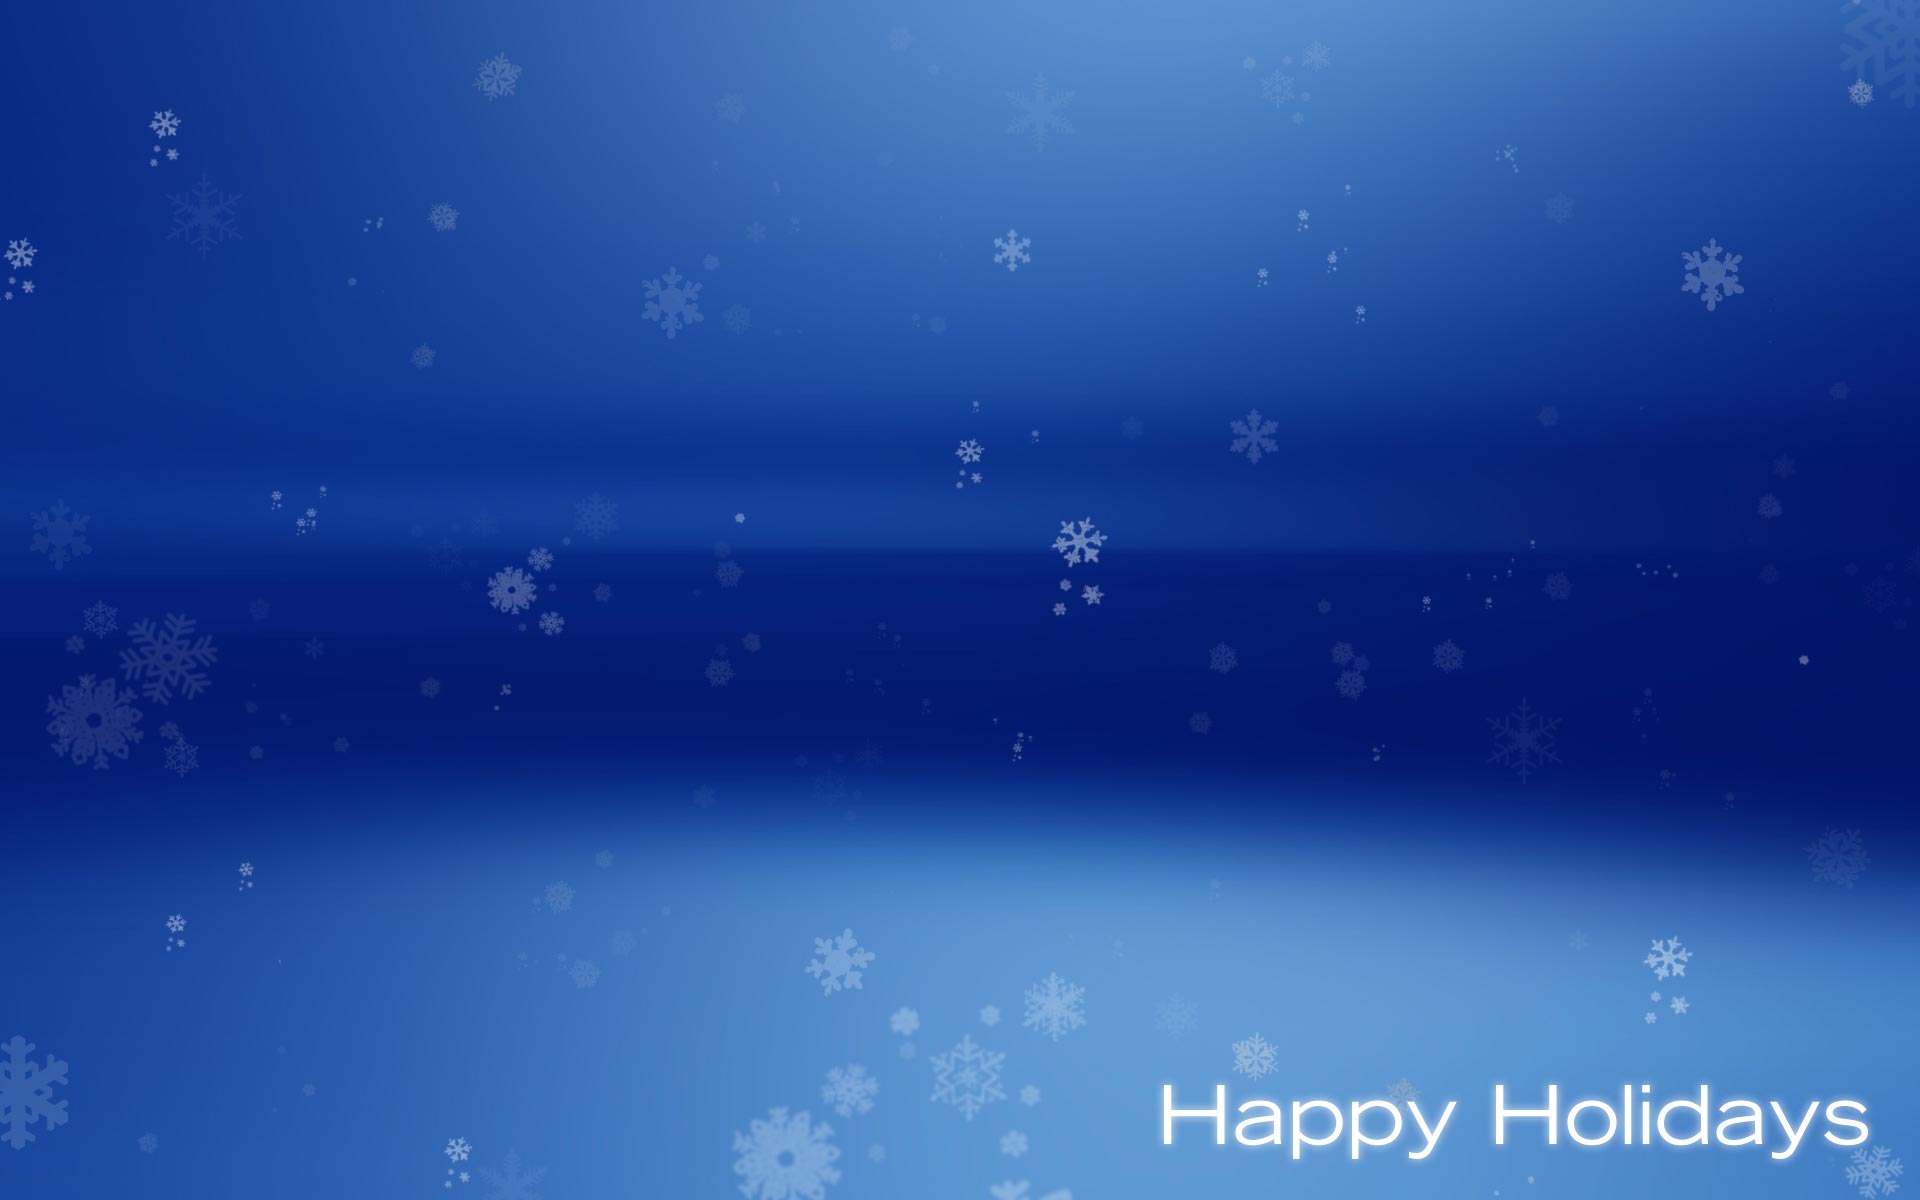 High Holiday Wallpaper Backgrounds download free now